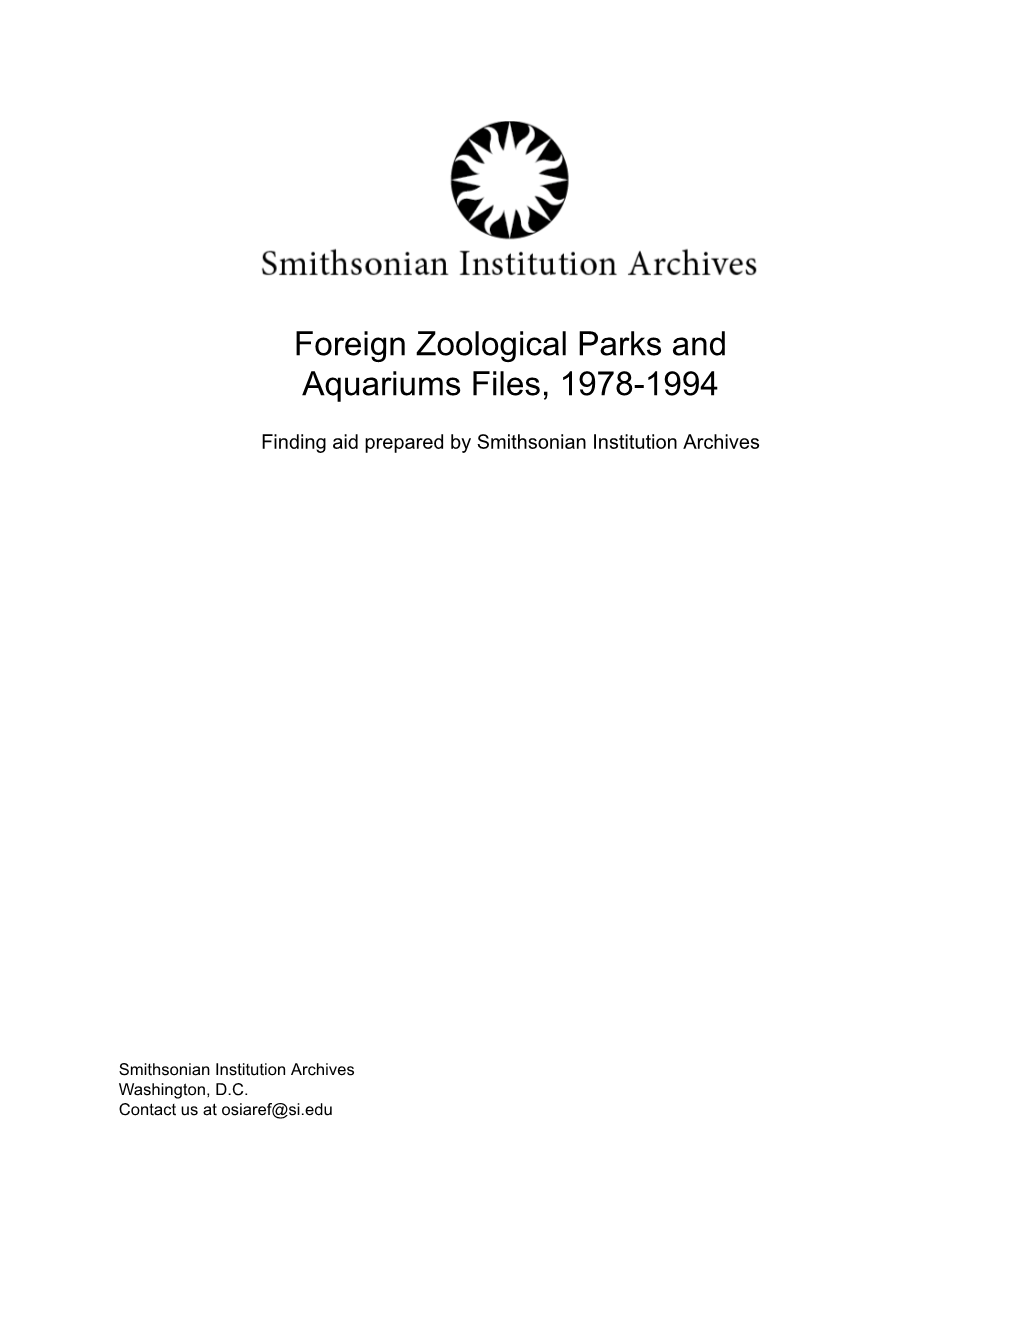 Foreign Zoological Parks and Aquariums Files, 1978-1994